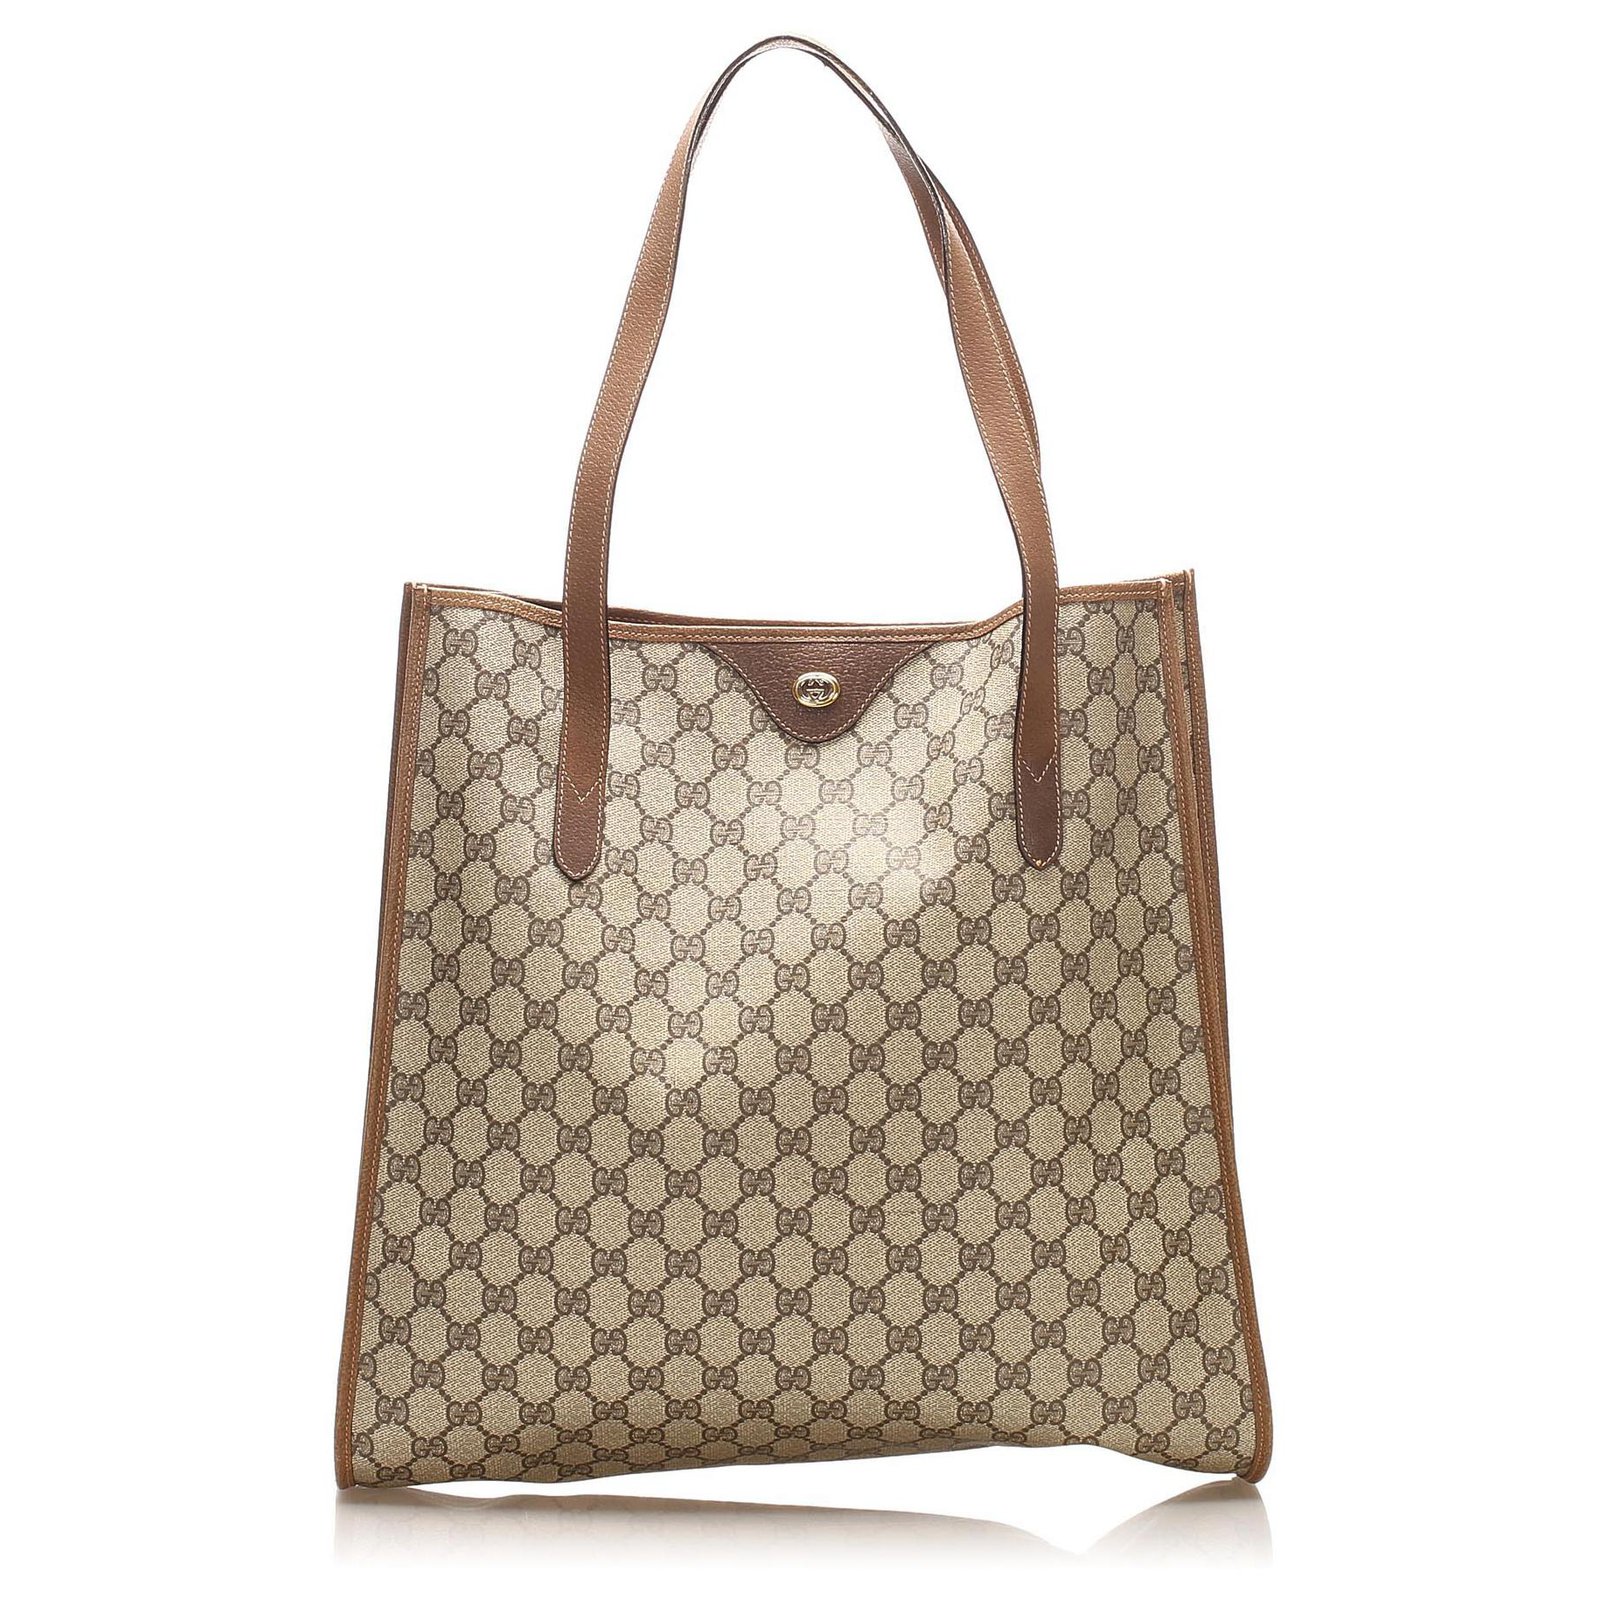 Gucci Brown GG Supreme Tote Bag Beige Leather Cloth Pony-style calfskin ...